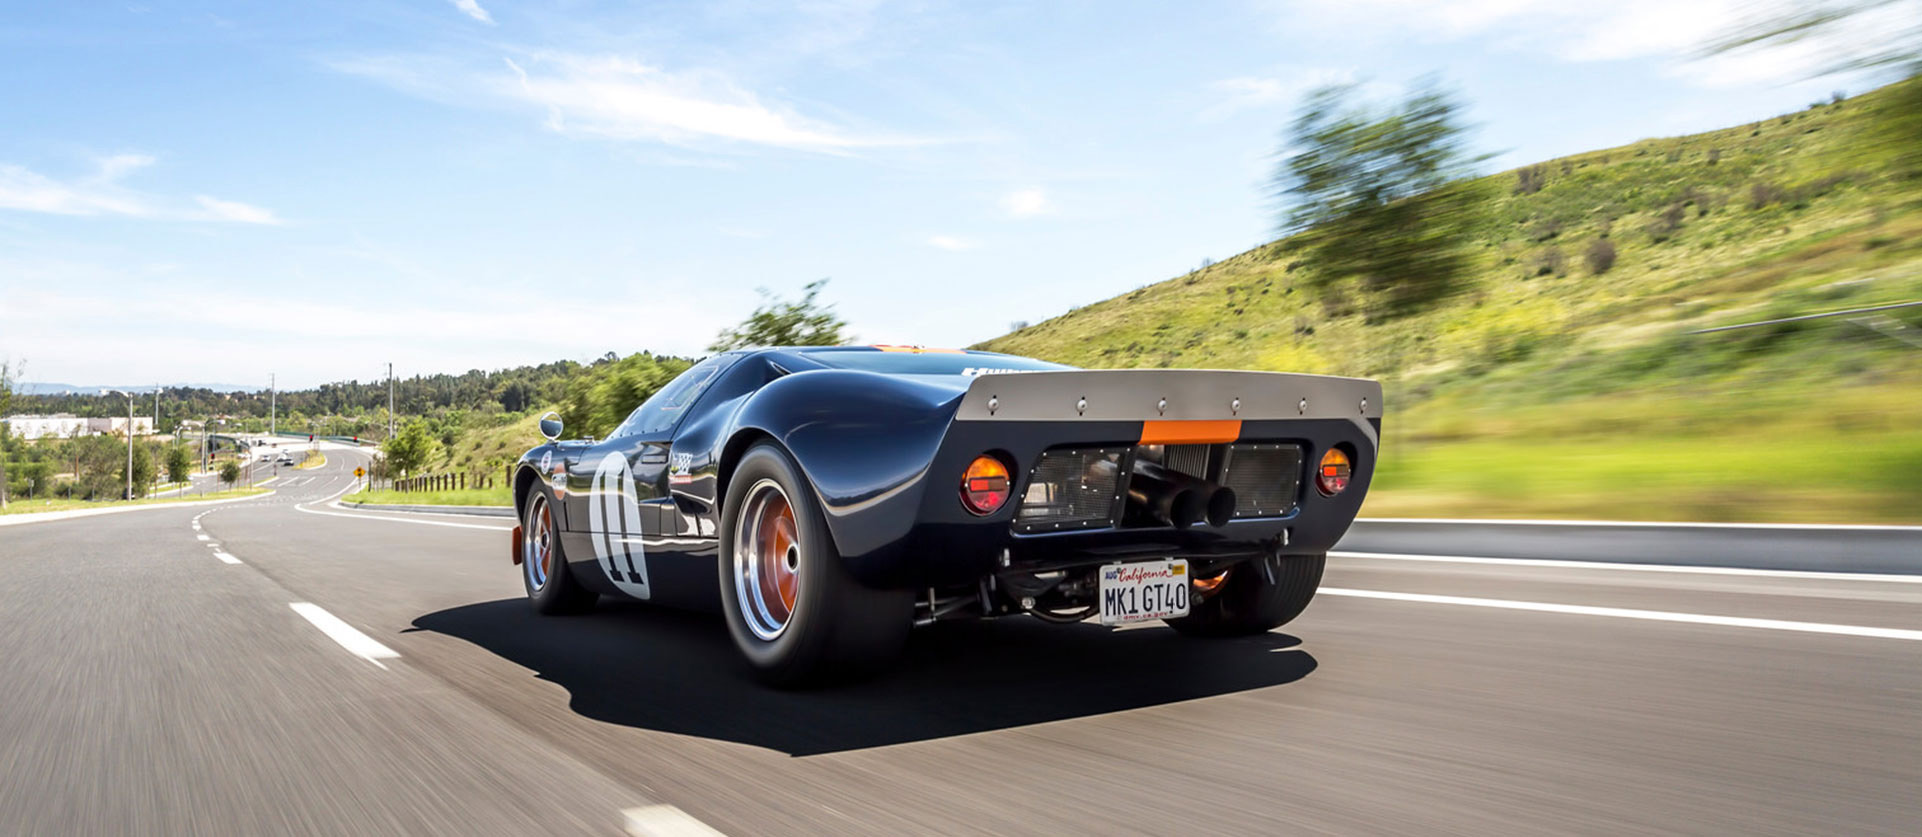 Genuine GT40 cars for sale, produced by Superformance